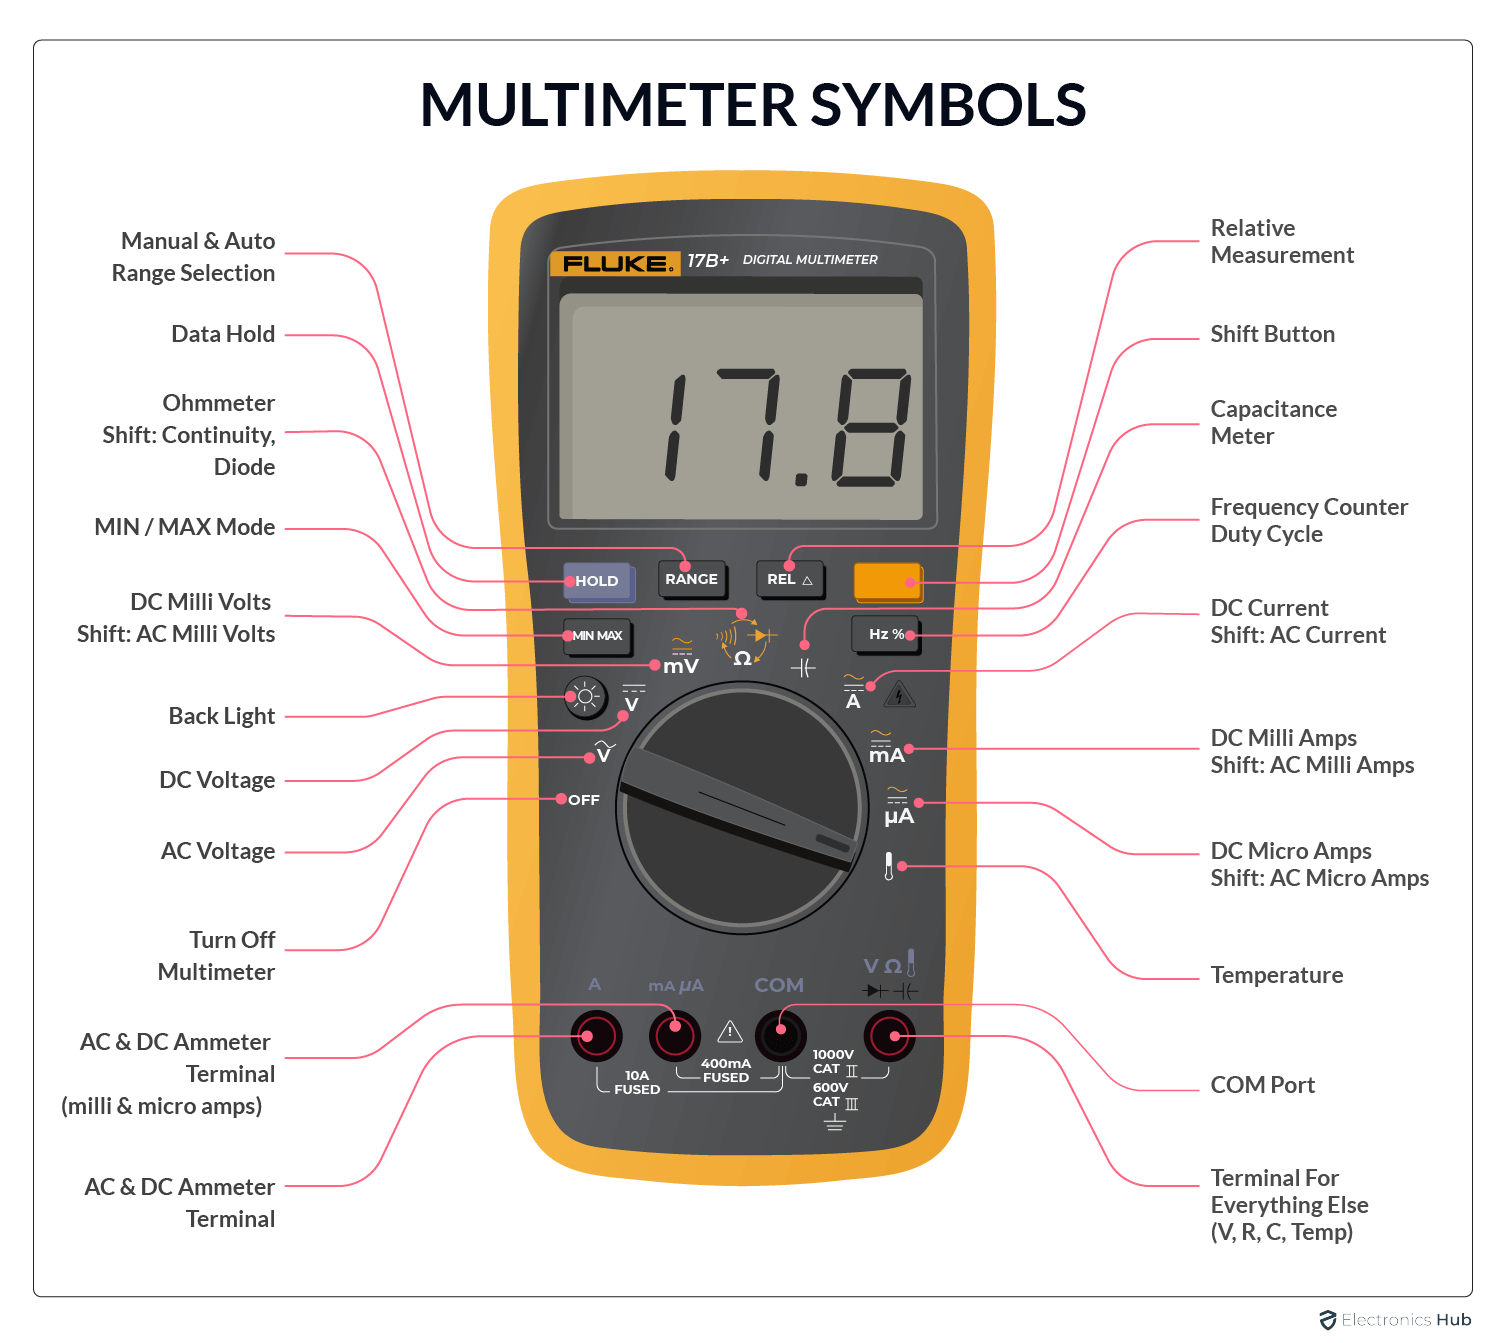 How To Use A Multimeter For Dummies Pdf Multimeter Symbols Electronics Hub